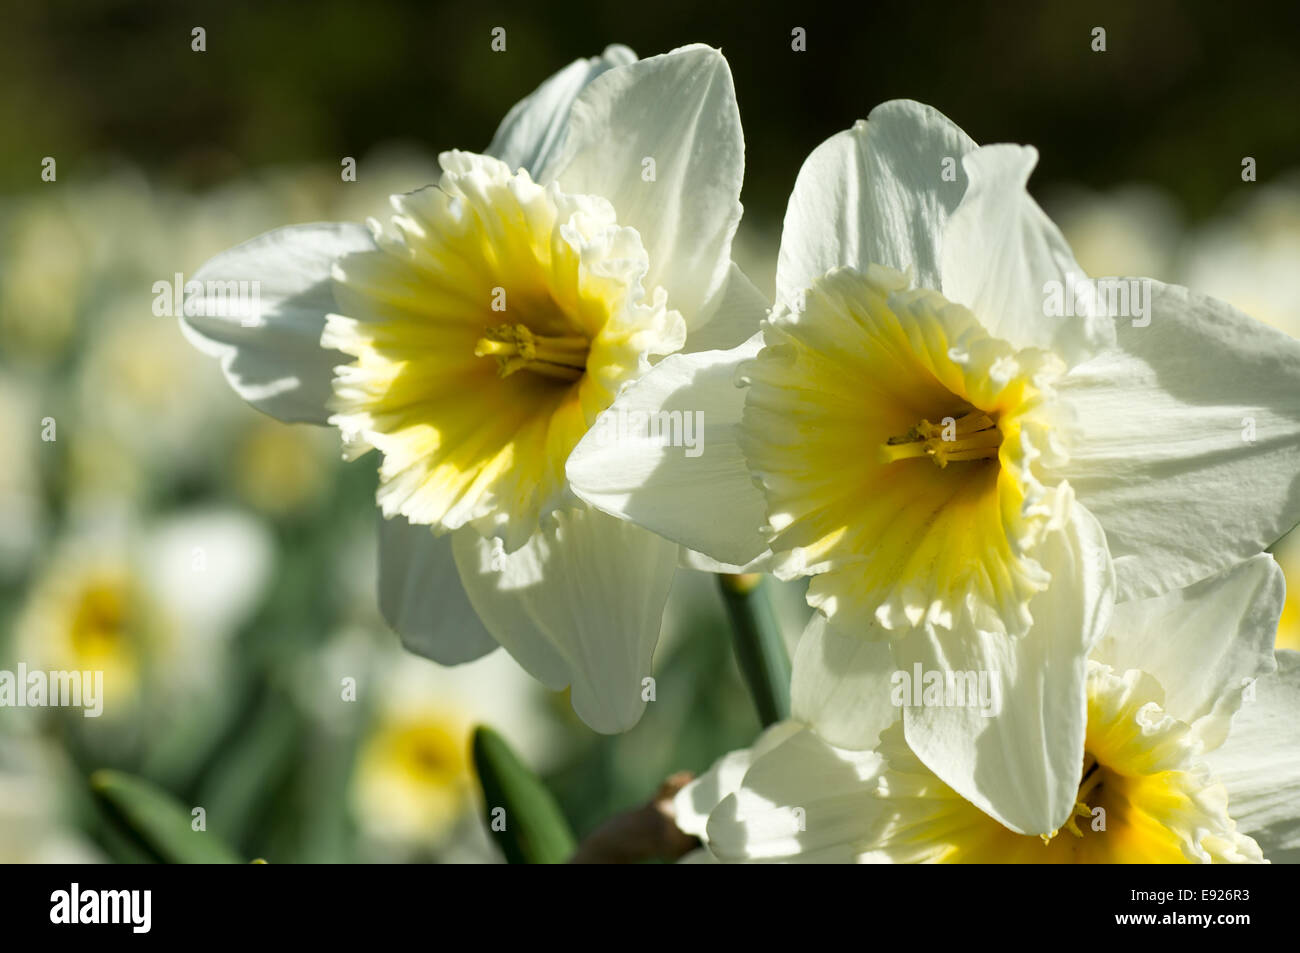 Blooming narcissus species Stock Photo - Alamy